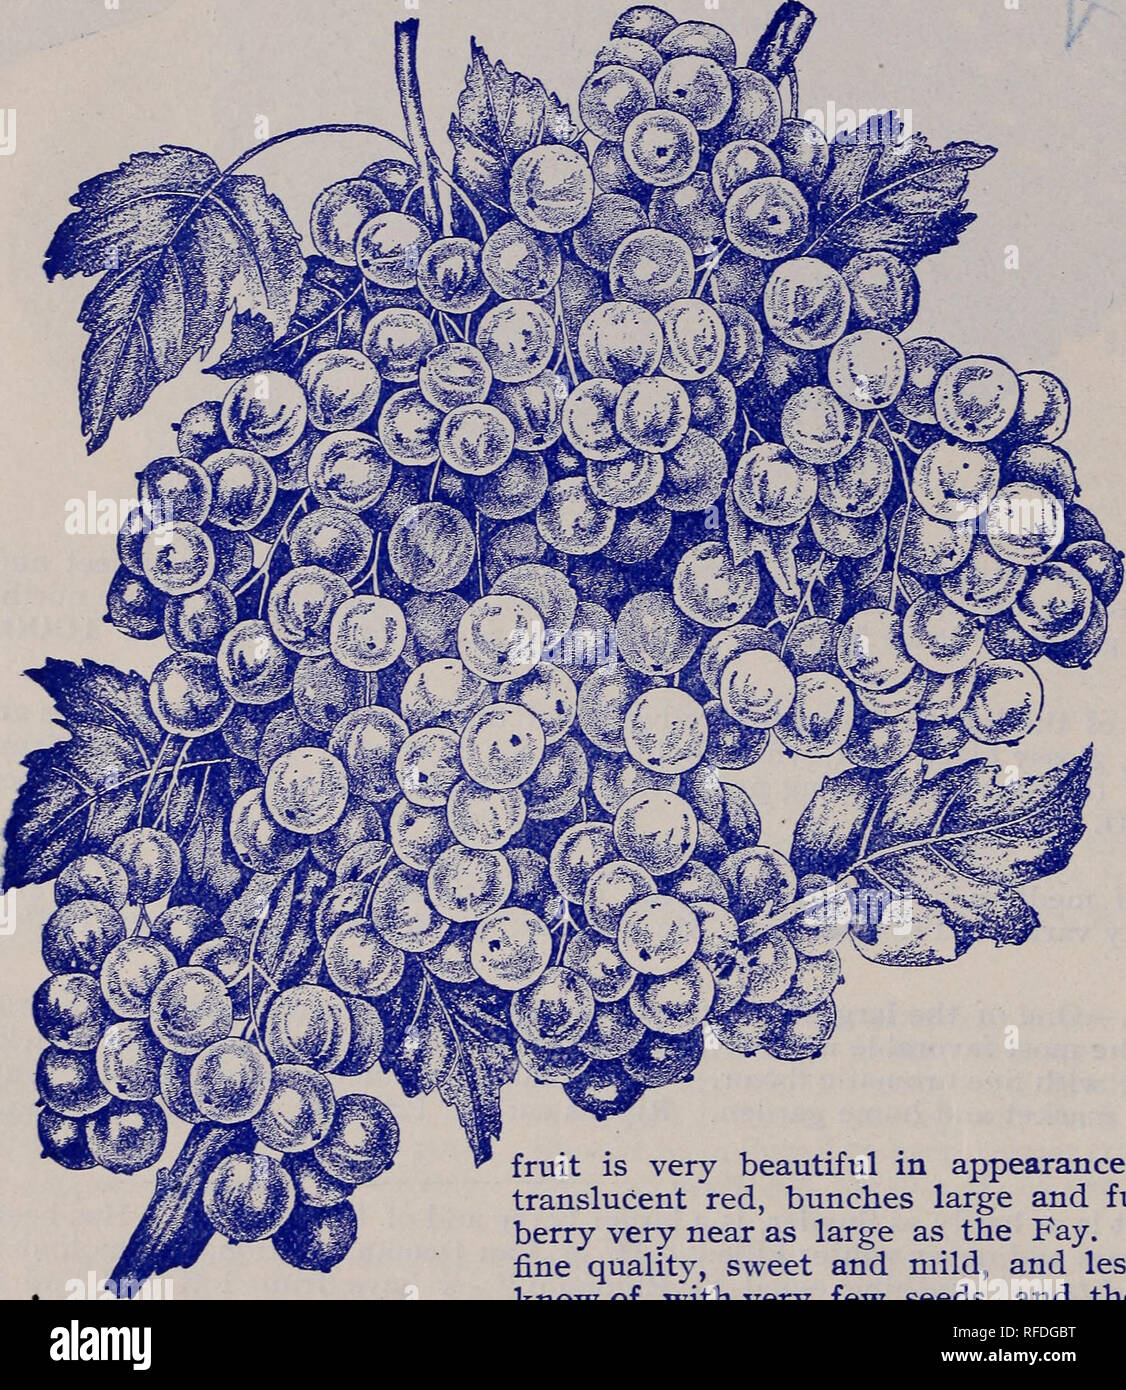 . Descriptive catalogue, free to all, spring of 1902. Nursery stock New York (State) Rochester Catalogs; Fruit Catalogs; Berries Catalogs; Grapes Catalogs. 16 AI^LEN L. WOOD, WHOIyESAI^E GROWER, CATALOGUE. eURRANTS. 5UPERI0R QUALITY AND UNIFORM GRADE, GUARANTEED THE BEST IN THE WORLD. Largest grower of Currants and Gooseberries of any Nurseryman in the world- They are choice plants. They are grown on soil that is specially adapted for Currants- and Gooseberries. g^^There is not over one-fifth as many Currant and Gooseberry plants in the country as there has been for the past three years. Order Stock Photo